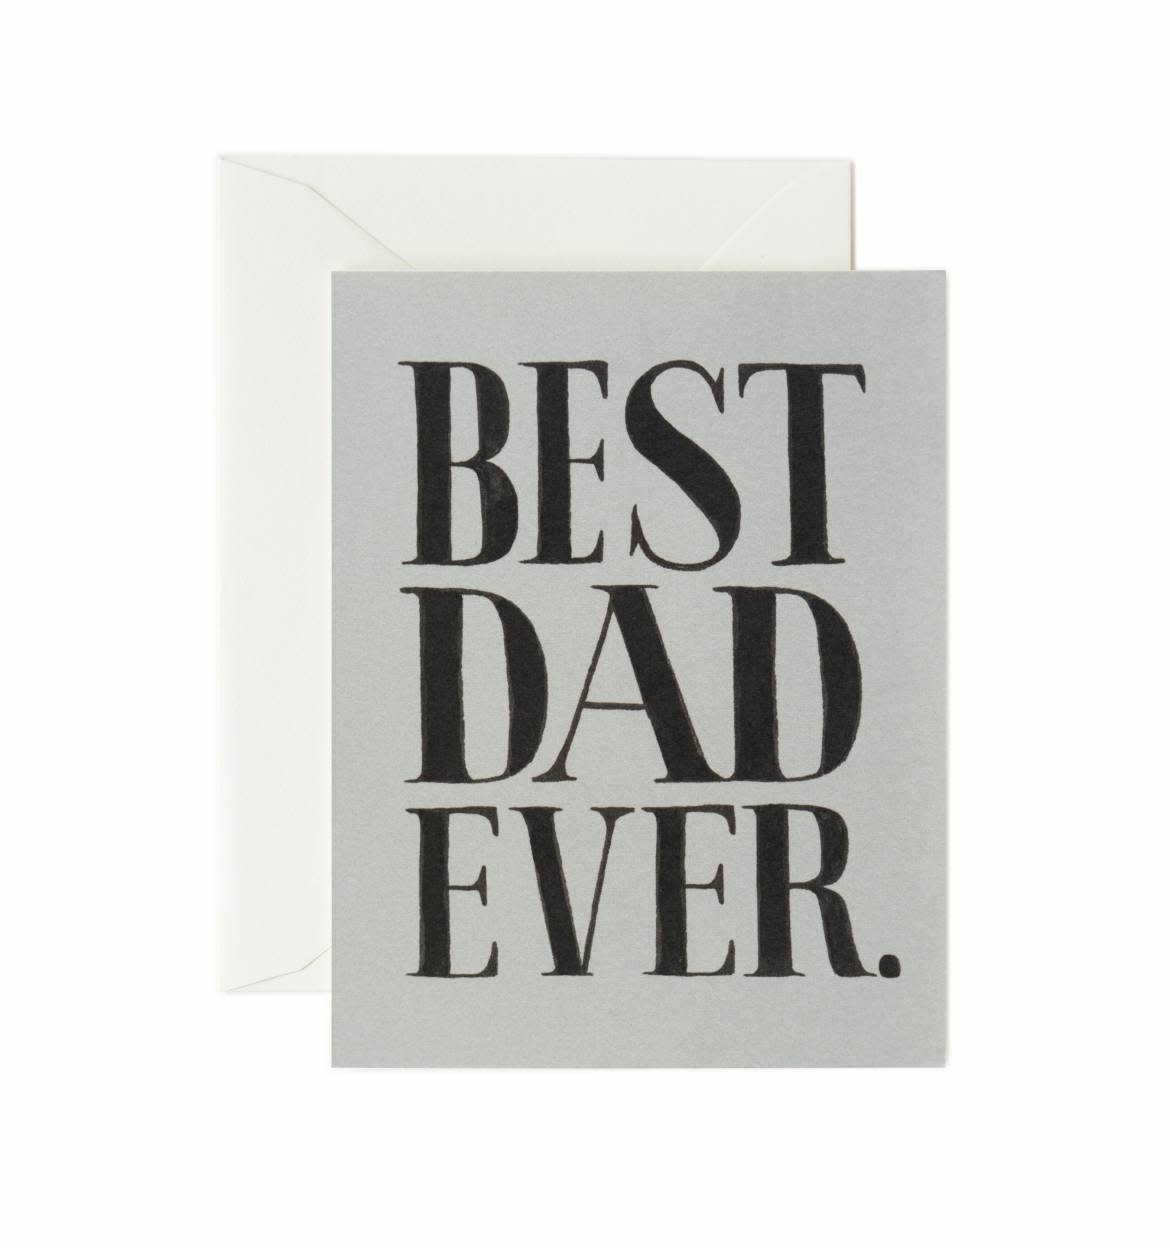 Rifle Paper Co. Rifle Paper Co. - Best Dad Ever Card